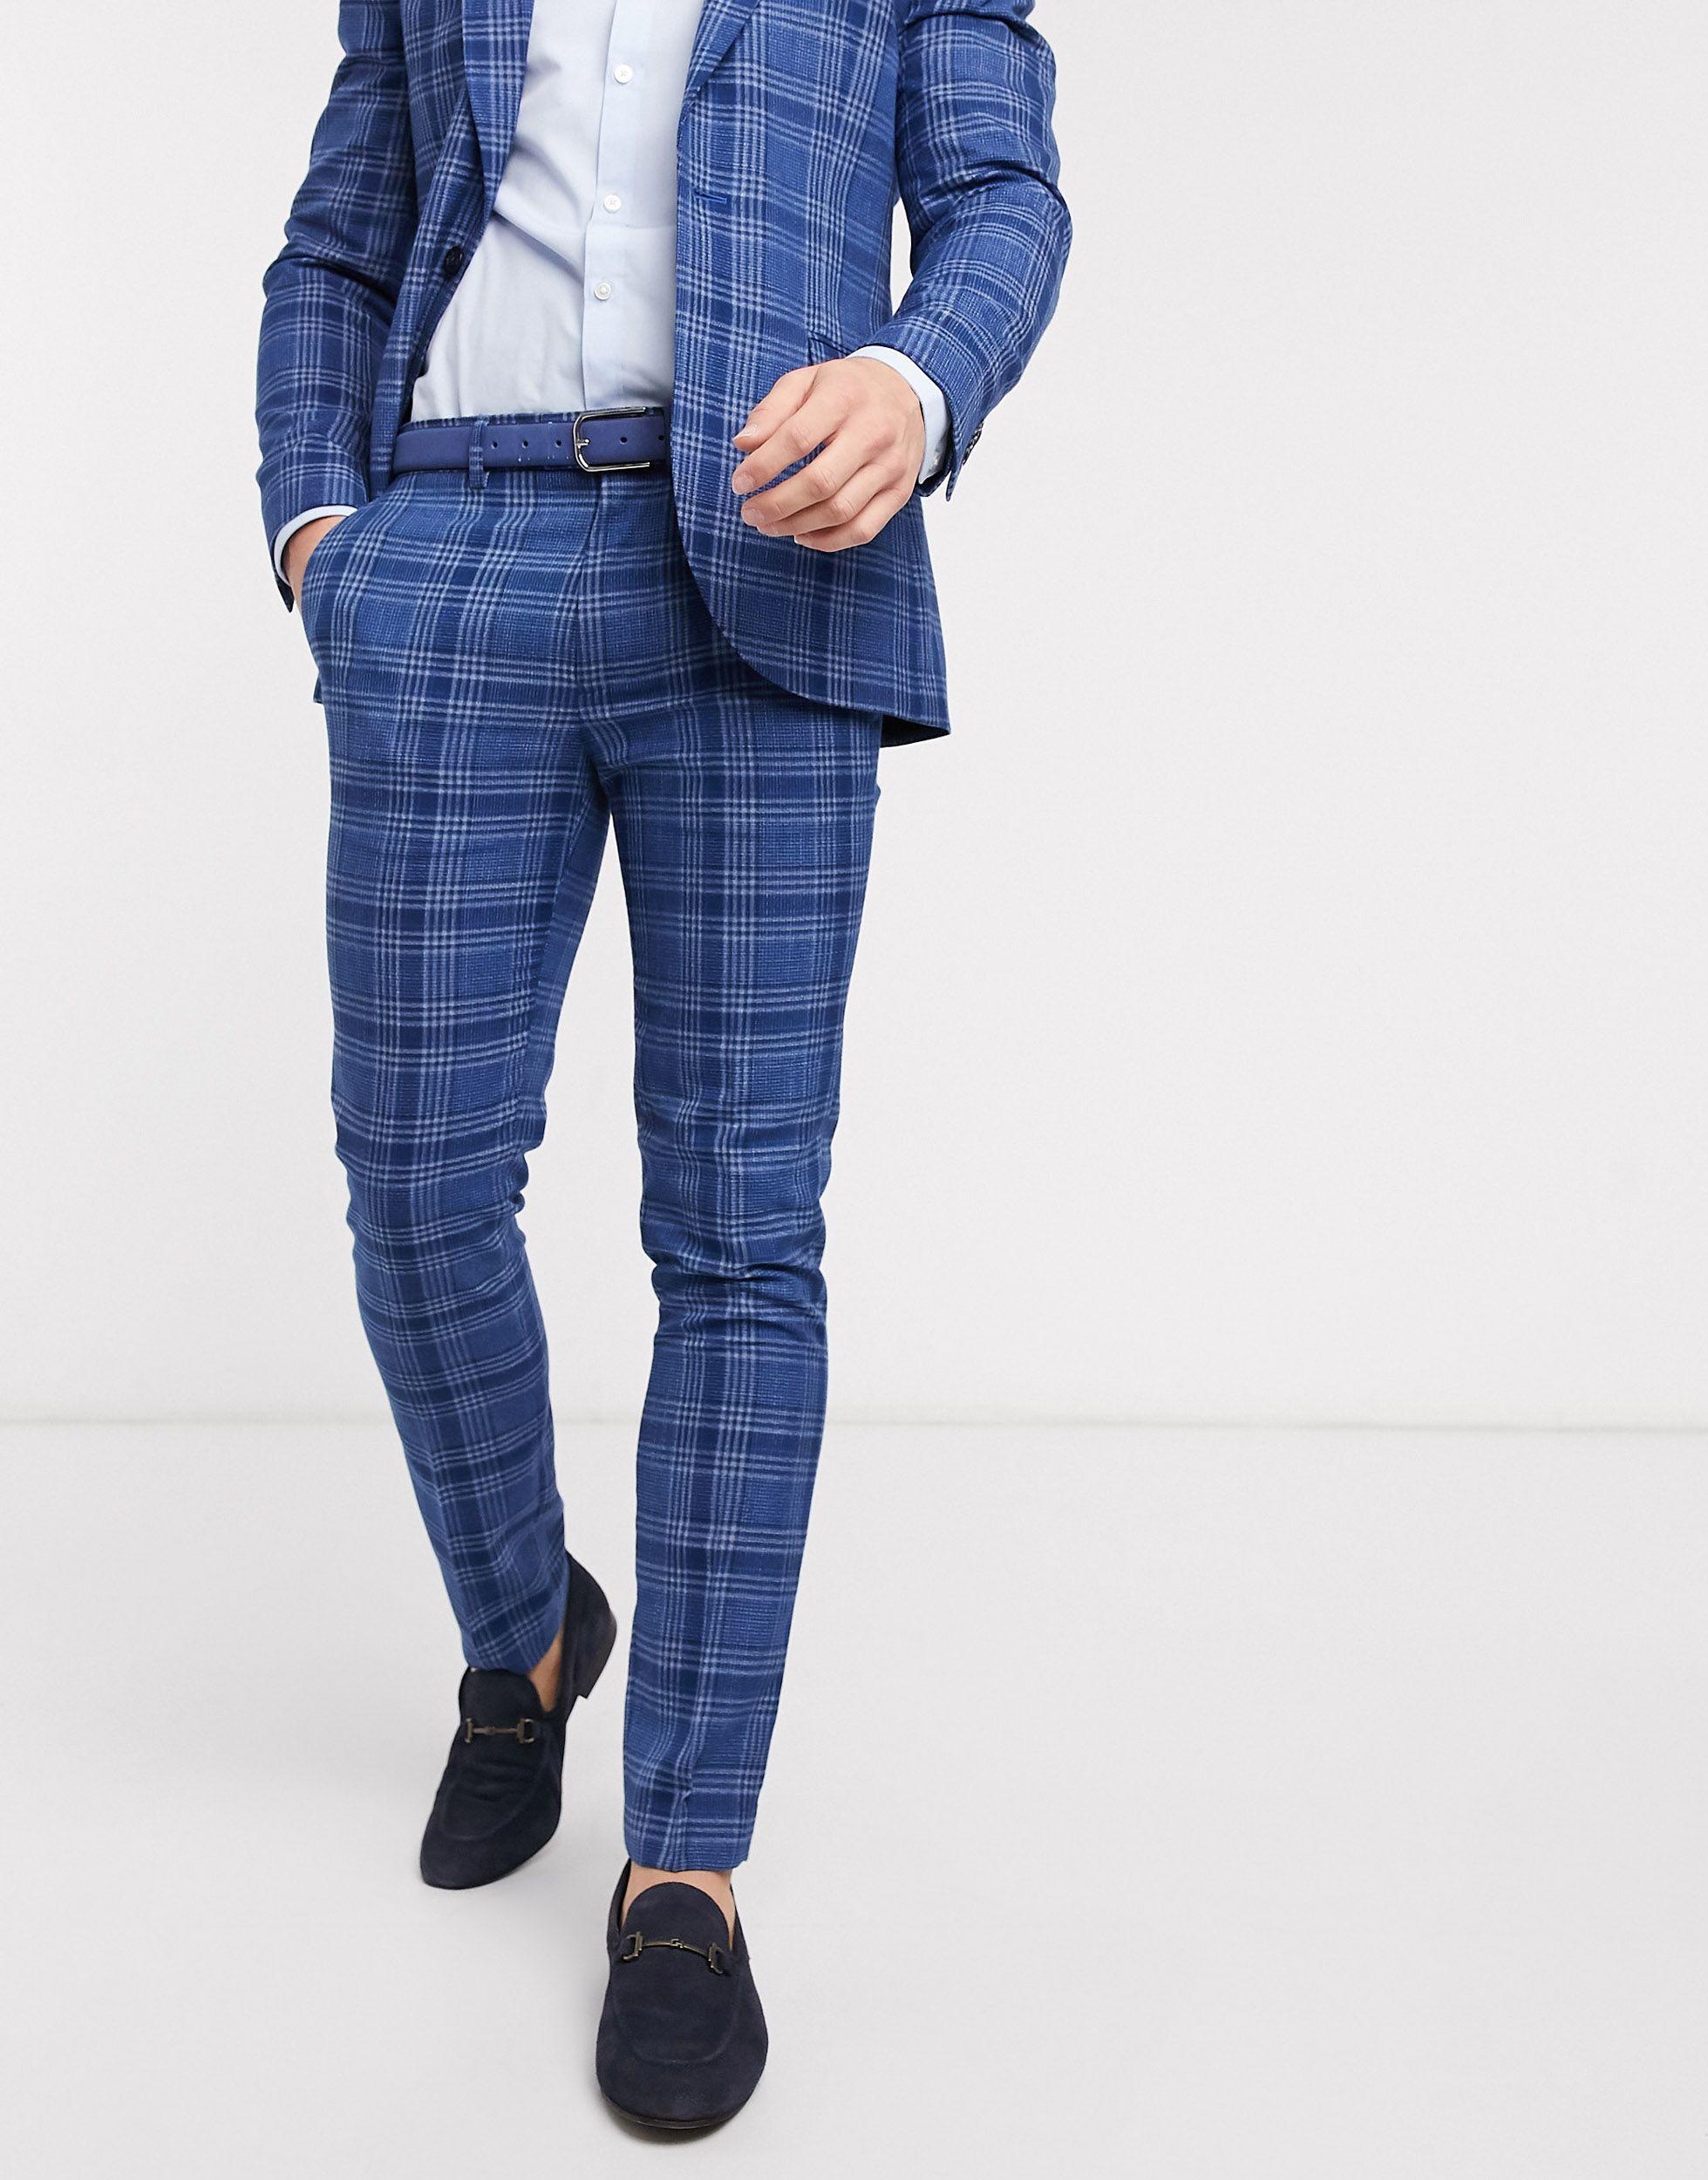 TOPMAN Skinny Fit Checked Suit Jacket in Blue for Men | Lyst Canada